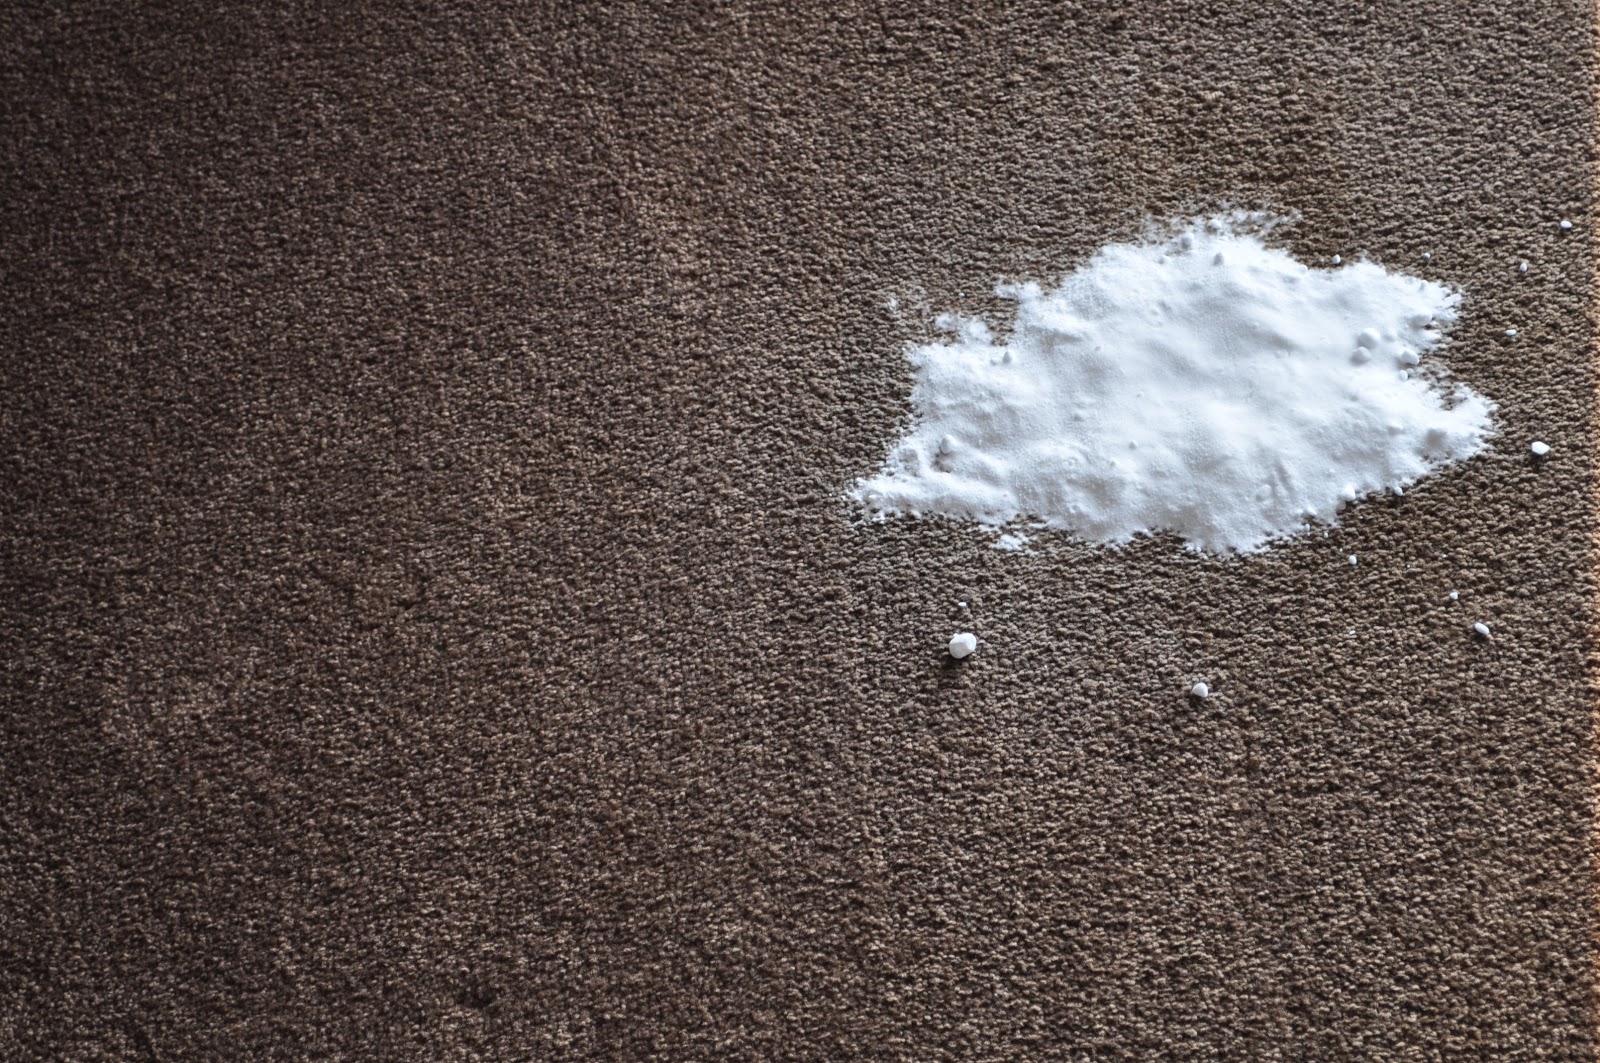 Baking soda has a lot of uses, one is as carpet cleaner.